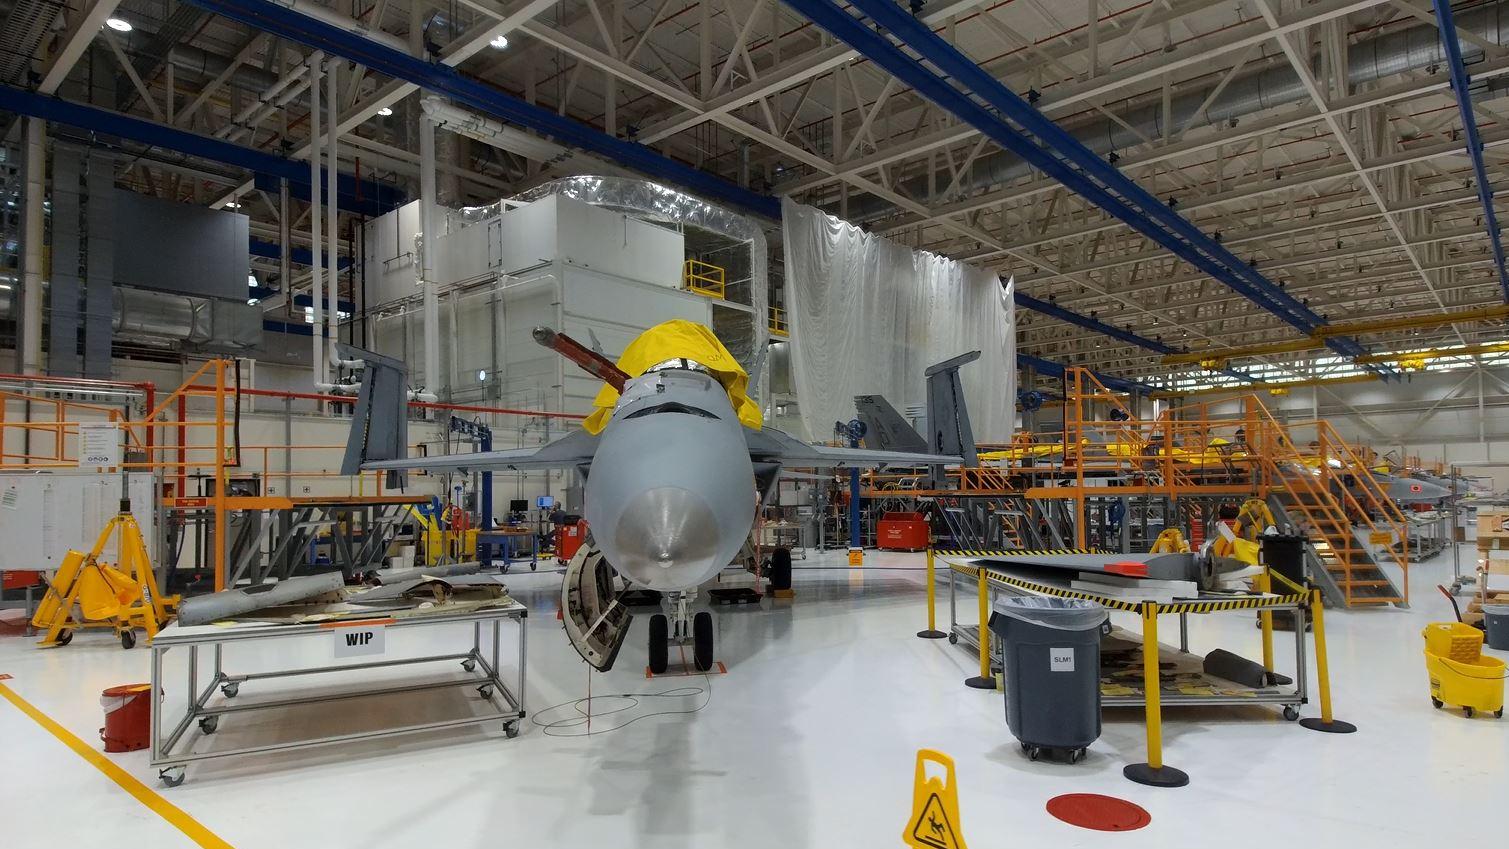 An F/A-18 Super Hornet undergoes Service Life Modification at The Boeing Companyâ€™s St. Louis facility